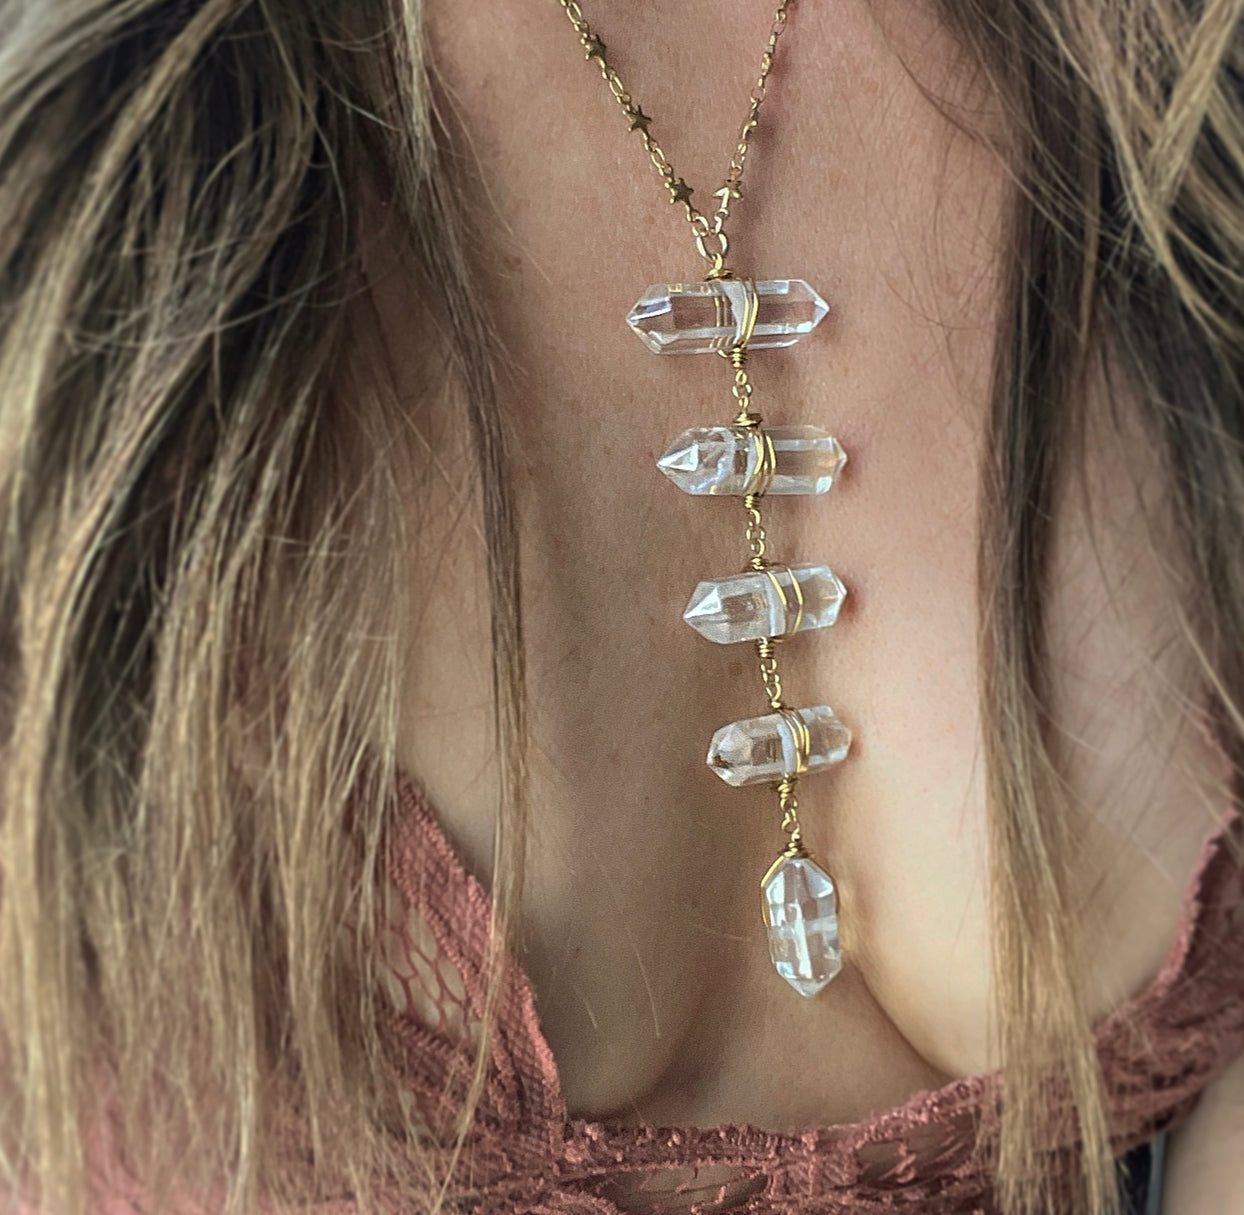 Clear Quartz Crystal Shield Necklace- Unique Star Chain- Handcrafted Gold/ Silver Electroformed Chunky Crystal Pendant Gold